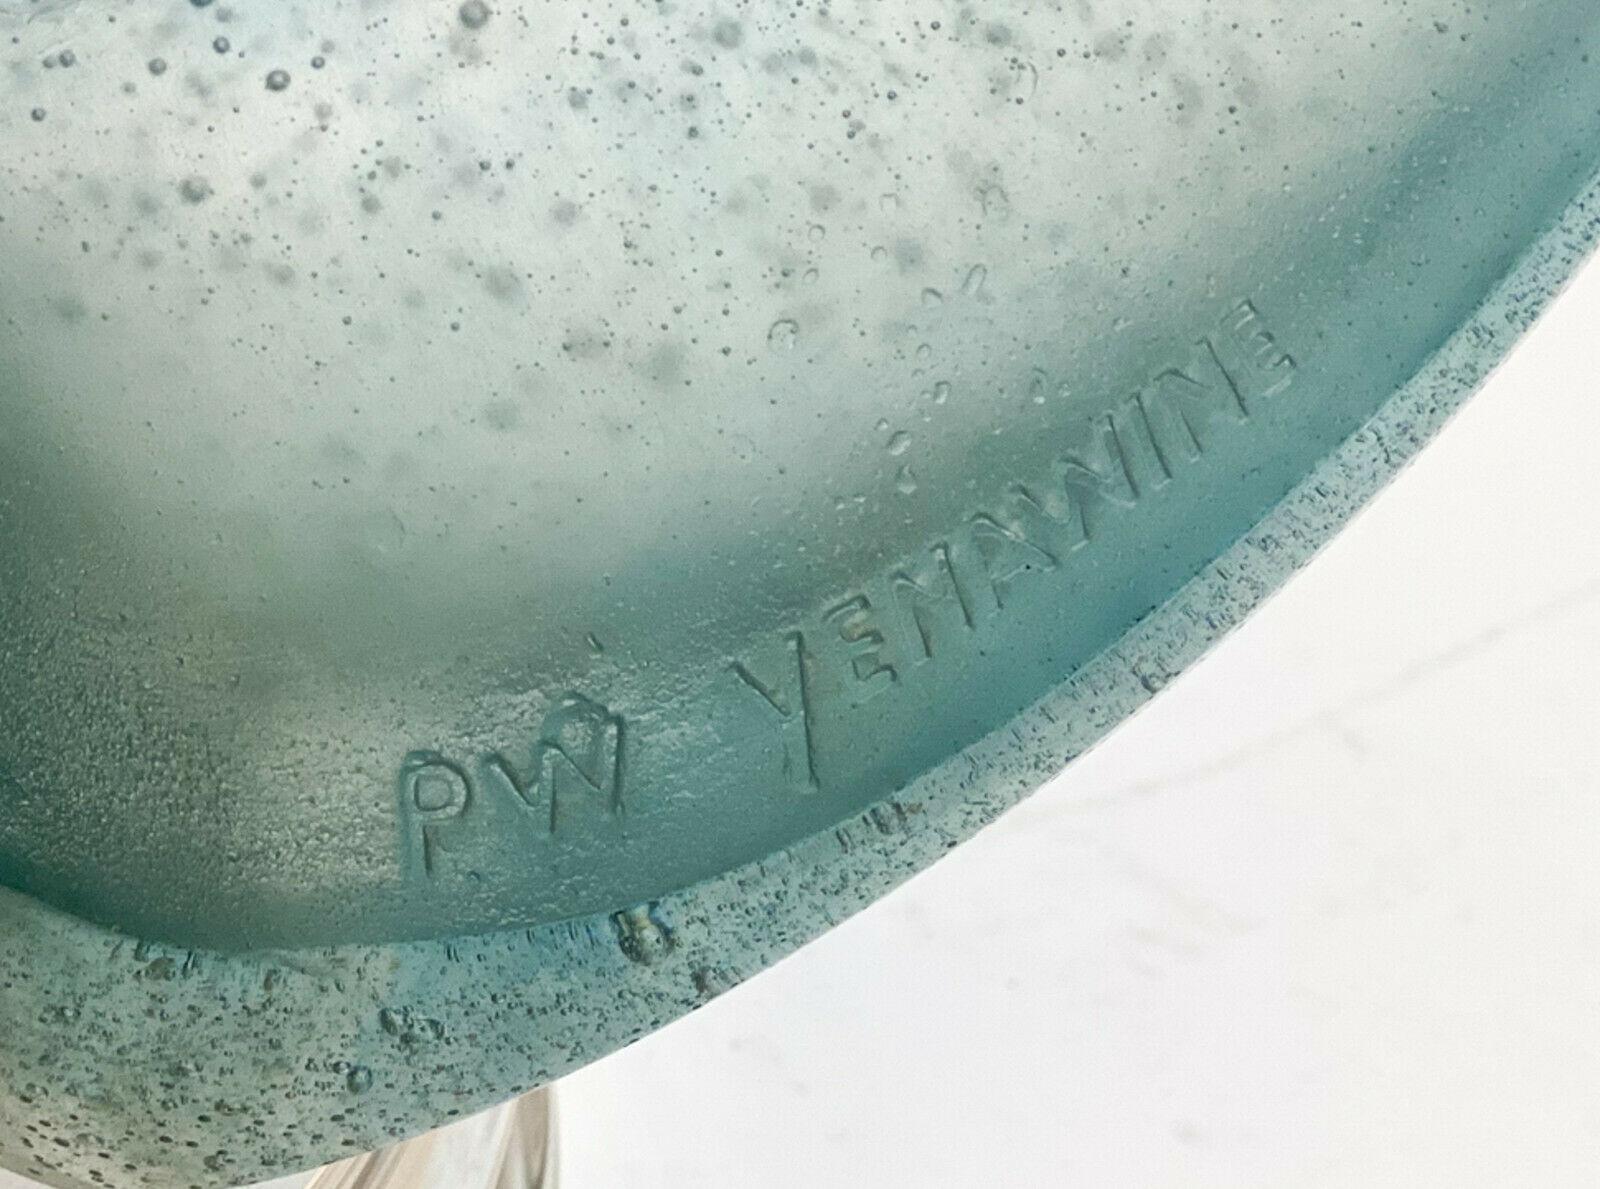 Daum France teal blue pate-de-verre dove bird sculpture, La Colombe by Peter W. Yenawine. Embossed Daum France mark along with the artist's name to the edge of the front and verso of the sculpture. Includes original name plaque and Lucite base